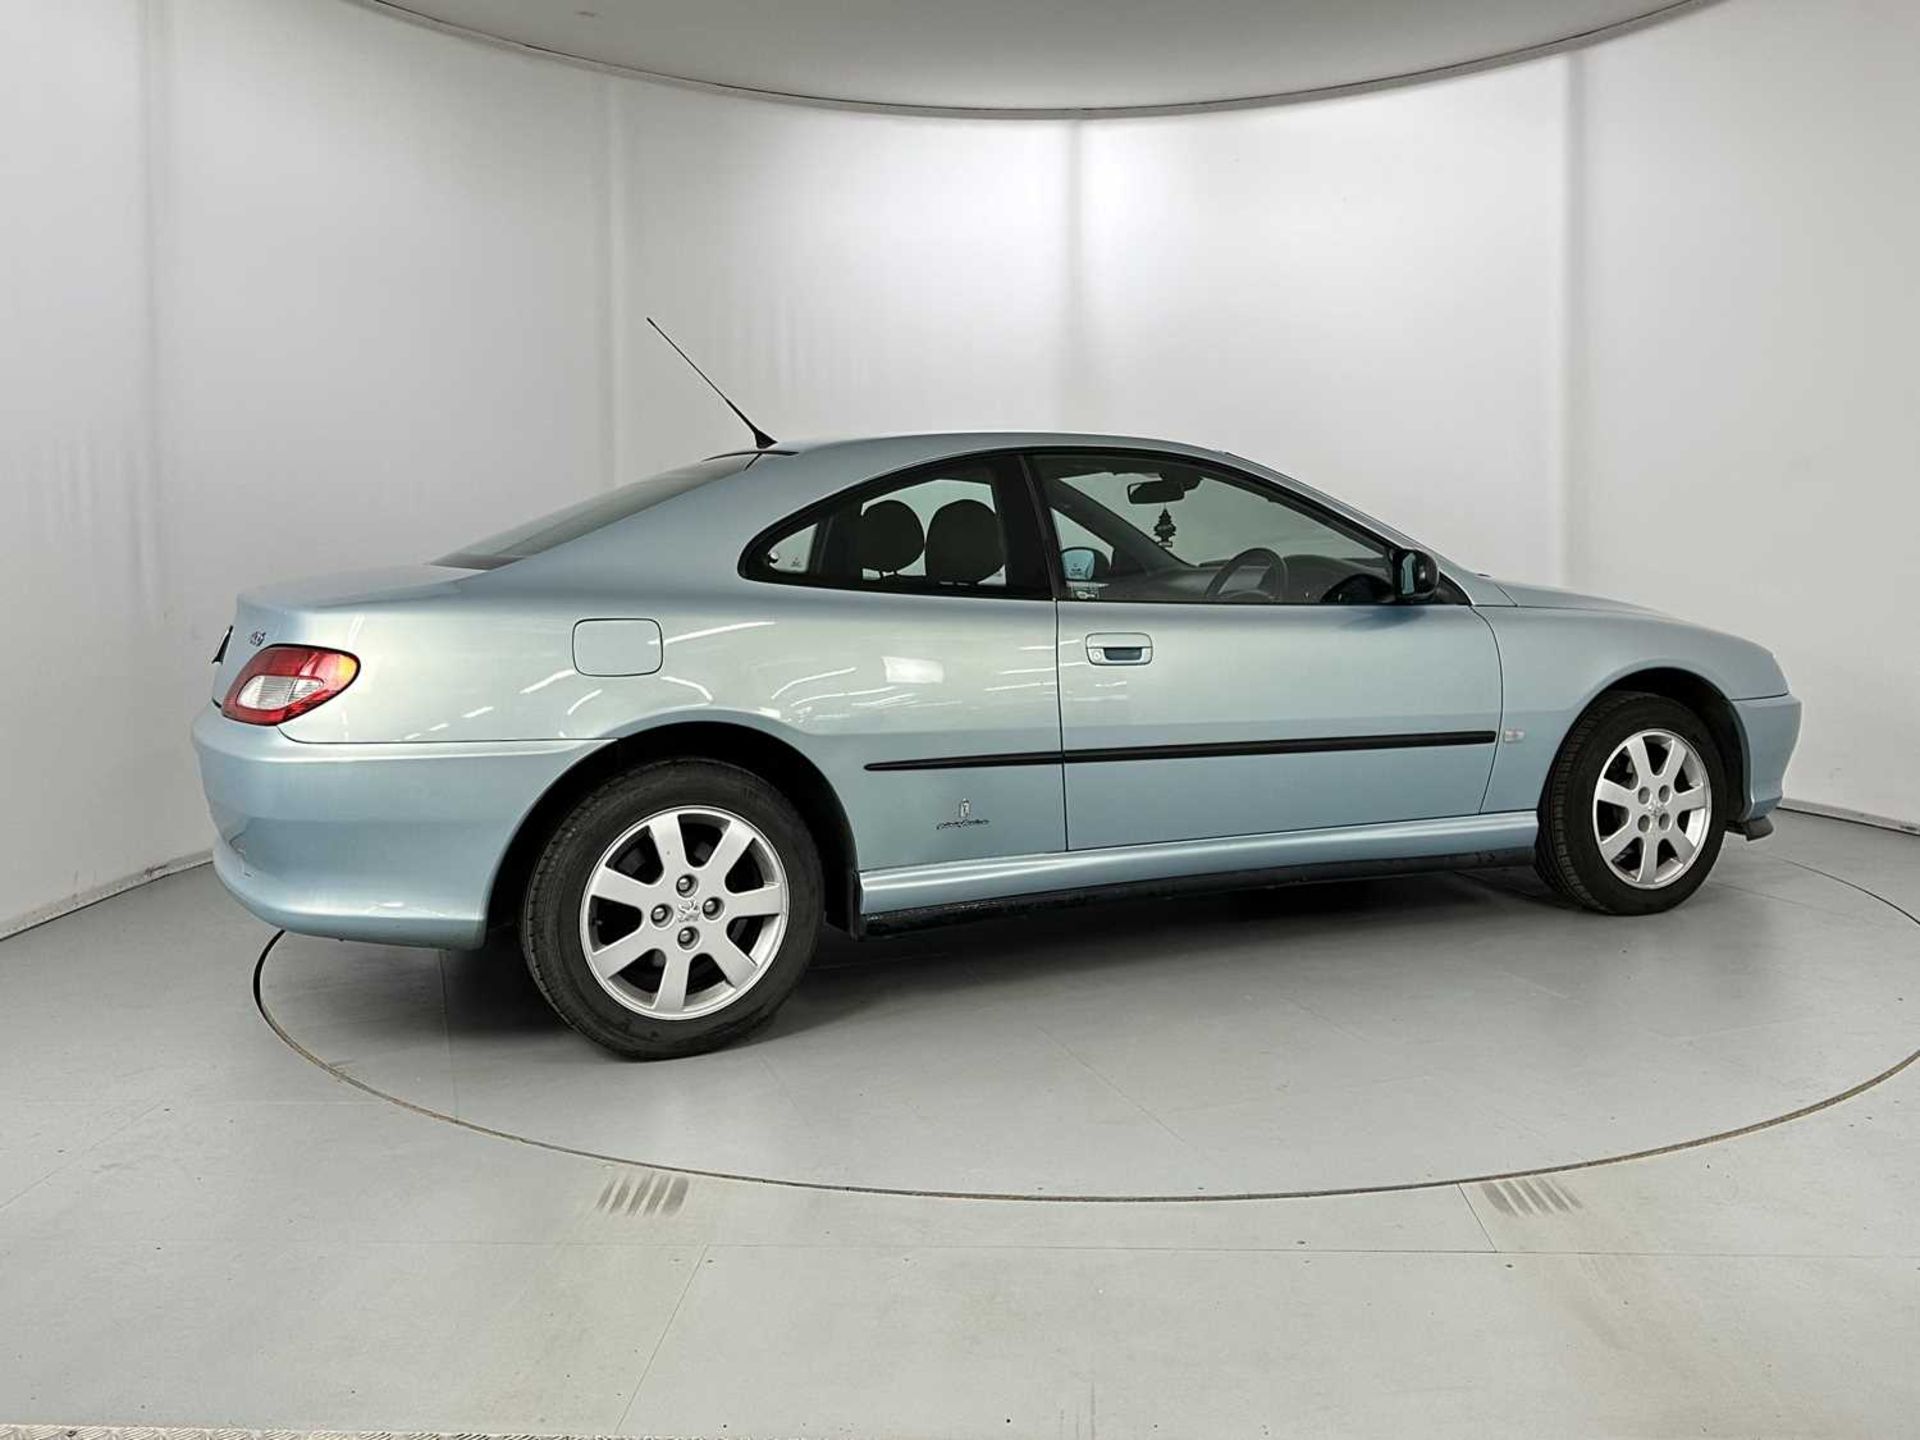 2002 Peugeot 406 Coupe - Image 10 of 28